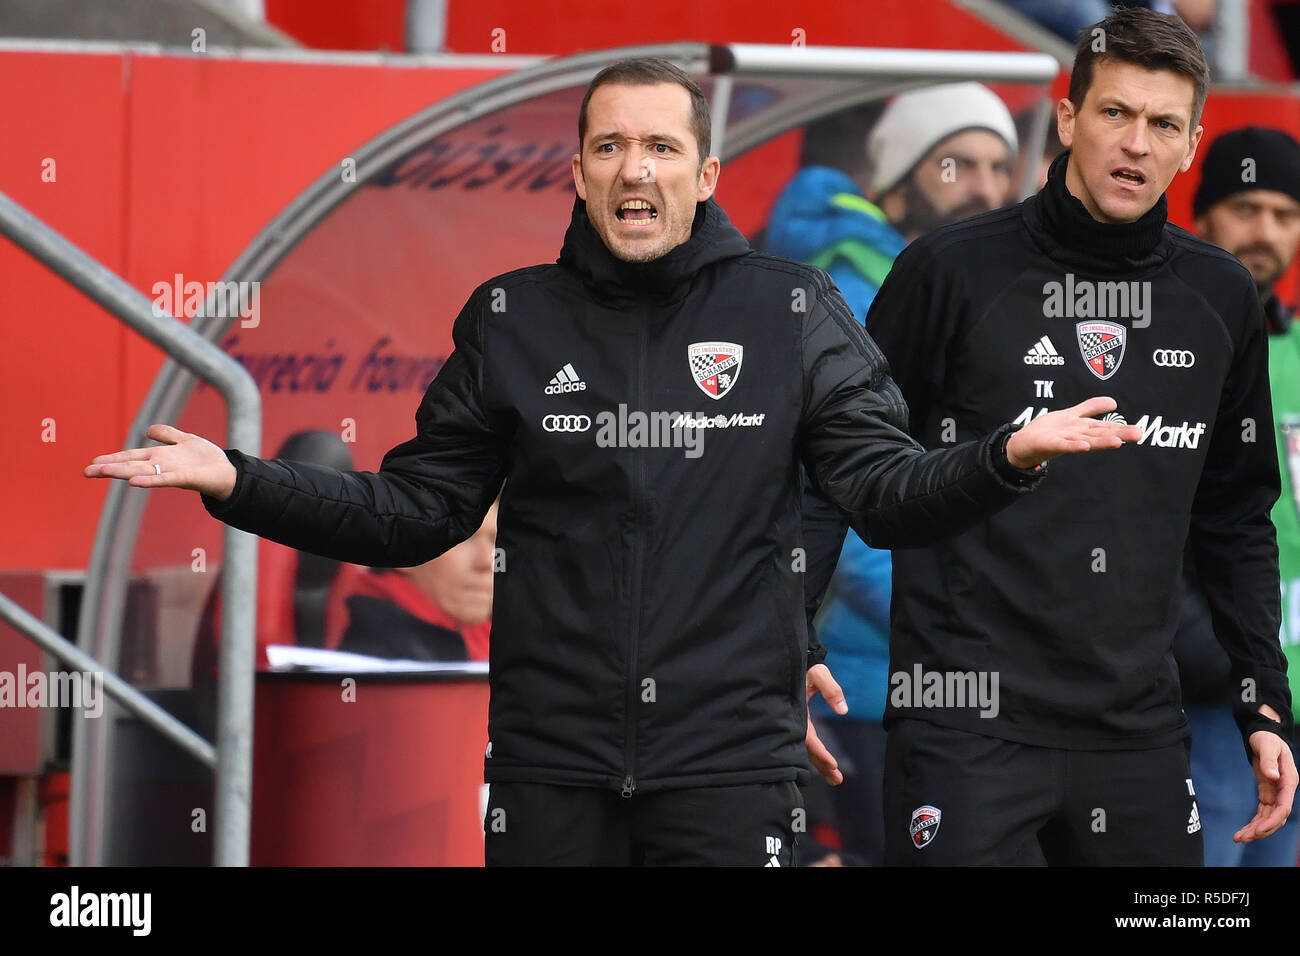 Ingolstadt, Deutschland. 01st Dec, 2018. Roberto PAETZOLD (Transition Coach IN), disappointment, frustrated, disappointed, frustratedriert, dejected, gesture, single image, single cut motive, half figure, half figure. Soccer 2. Bundesliga/FC Ingolstadt-HSV Hamburg Hamburg 1-2, 15.matchday, matchday15, Liga2, season 2018/19 on 01.12.2018, AUDI SPORTPARK., DFL REGULATIONS PROHIBIT ANY USE OF PHOTOGRAPHS AS IMAGE SEQUENCES AND/OR QUASI VIDEO. | usage worldwide Credit: dpa/Alamy Live News Stock Photo